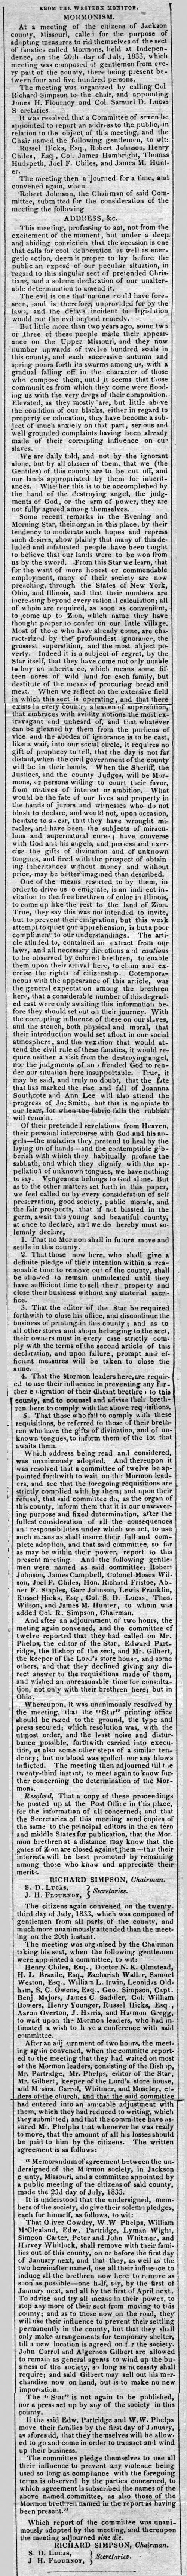 Western Monitor August 2, 1833